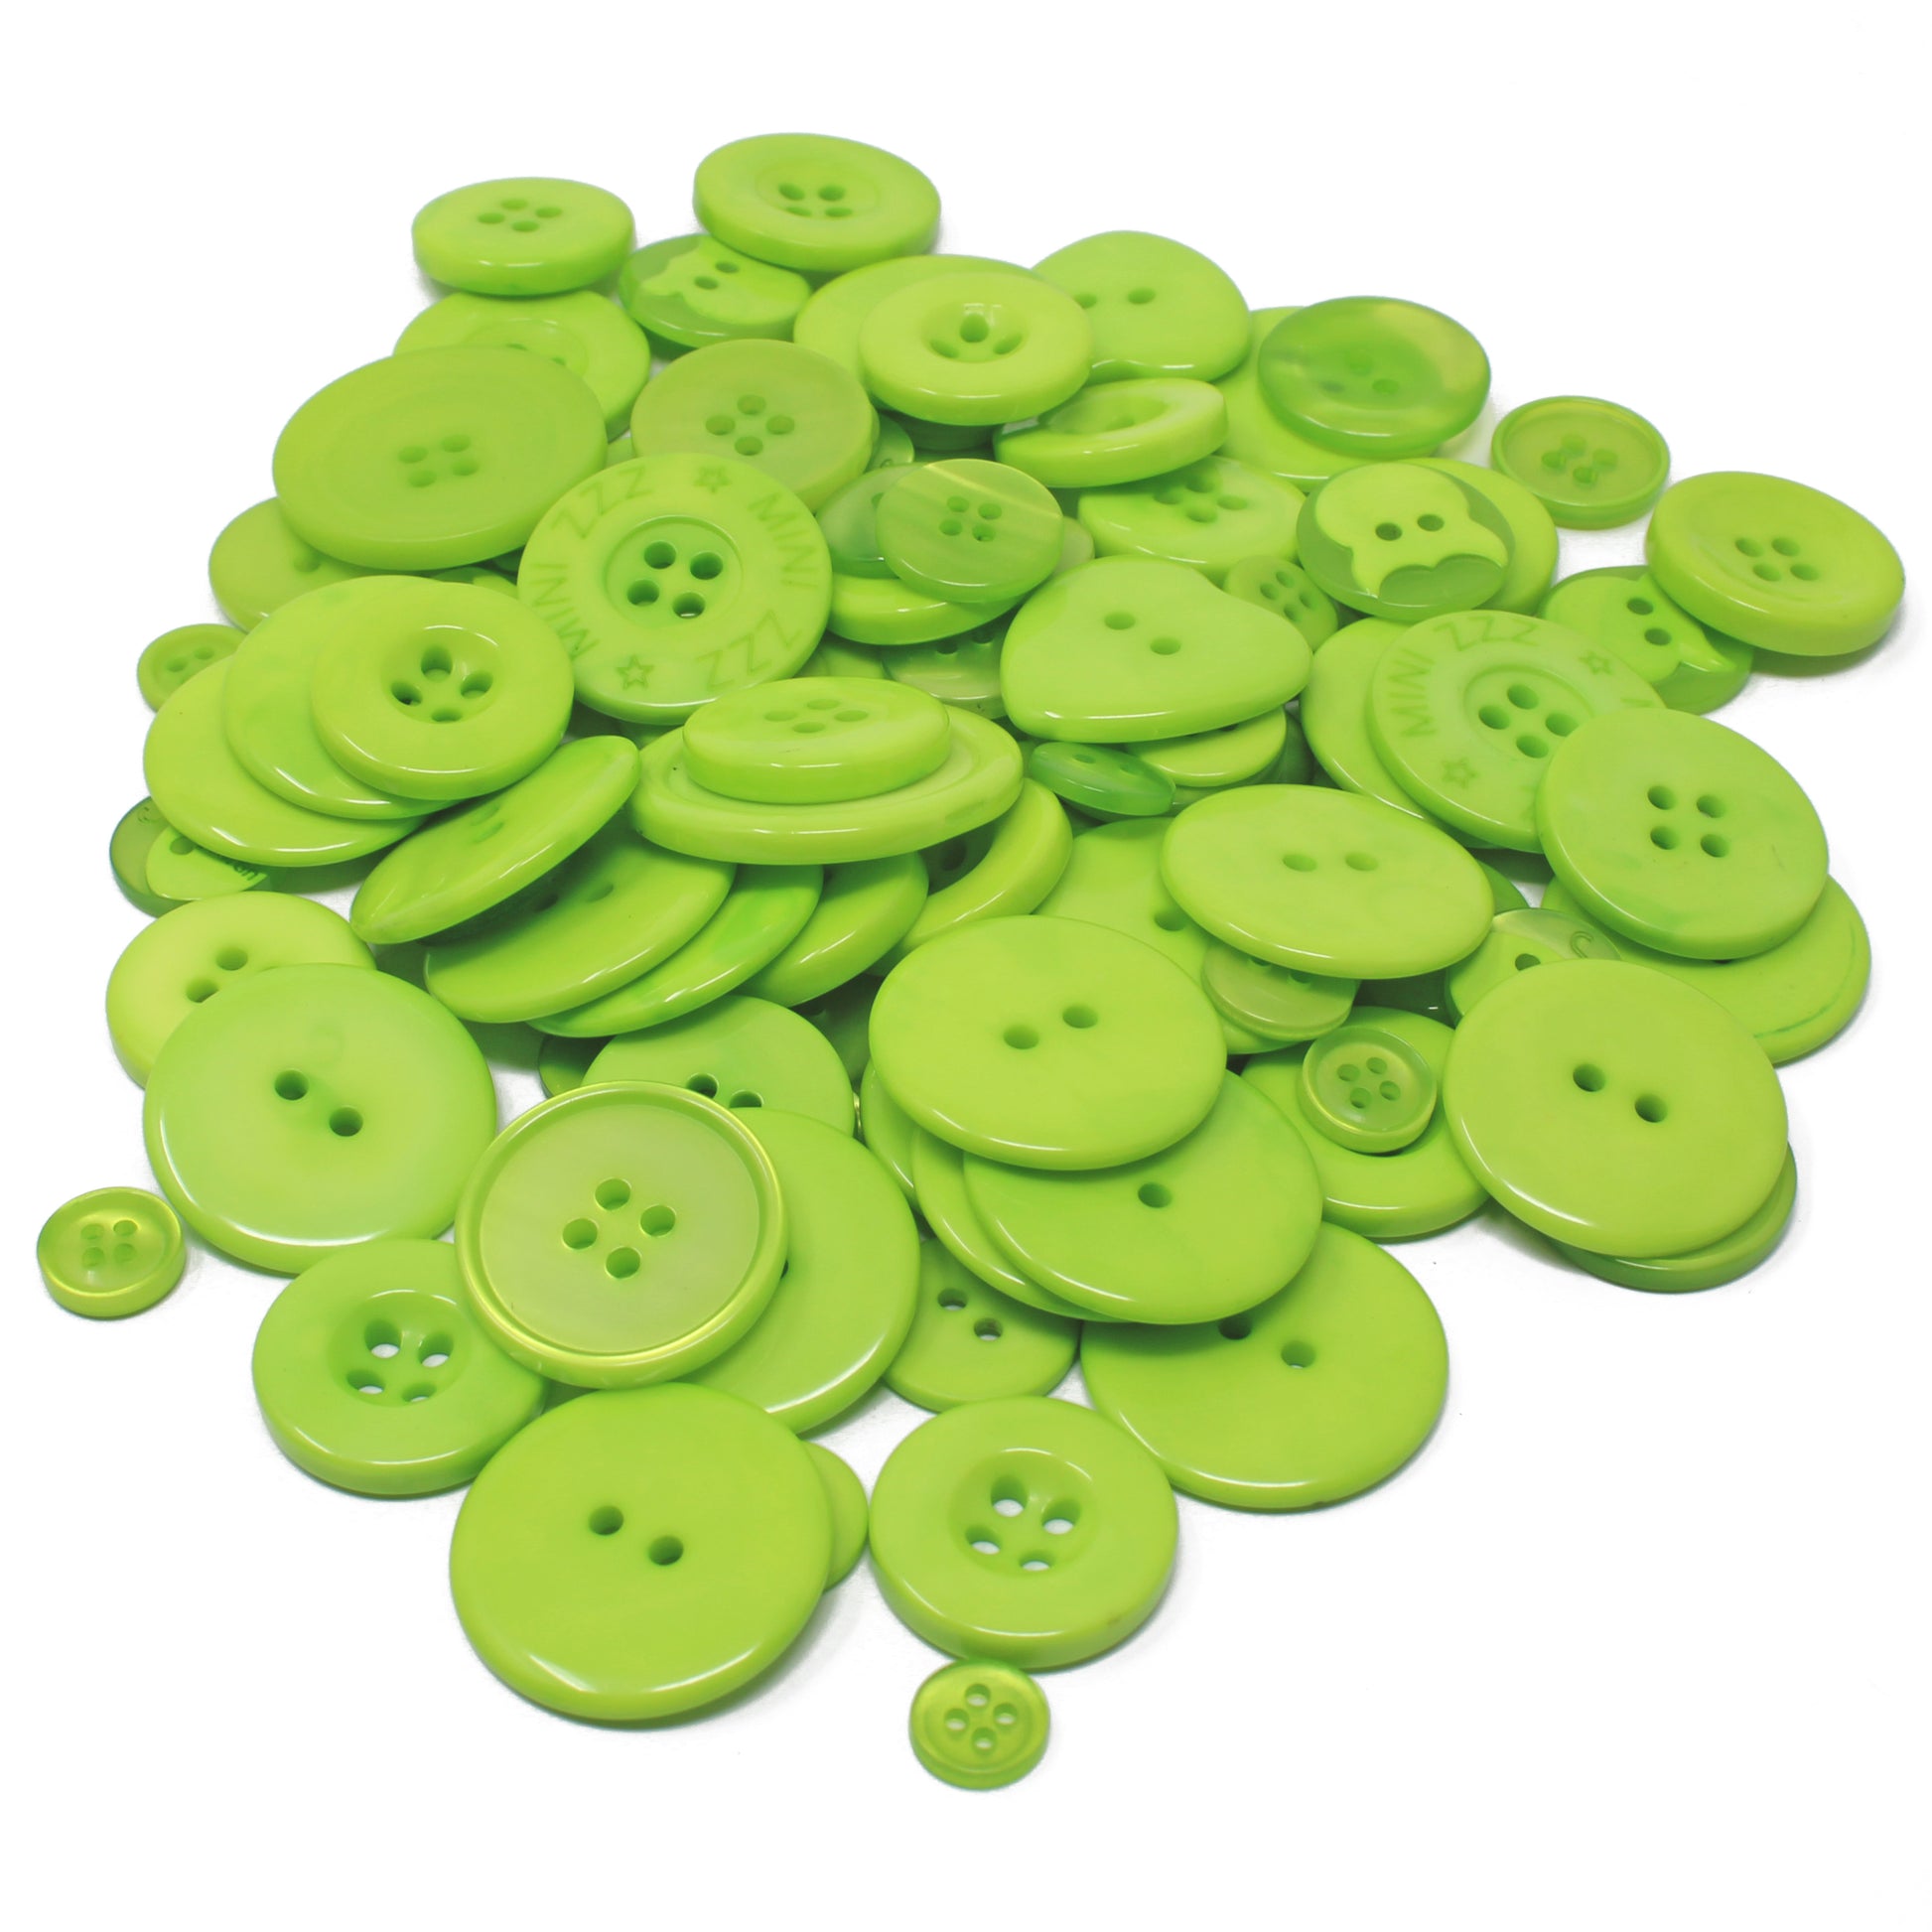 Green 100g Bags Of Mix Acrylic & Resin Buttons